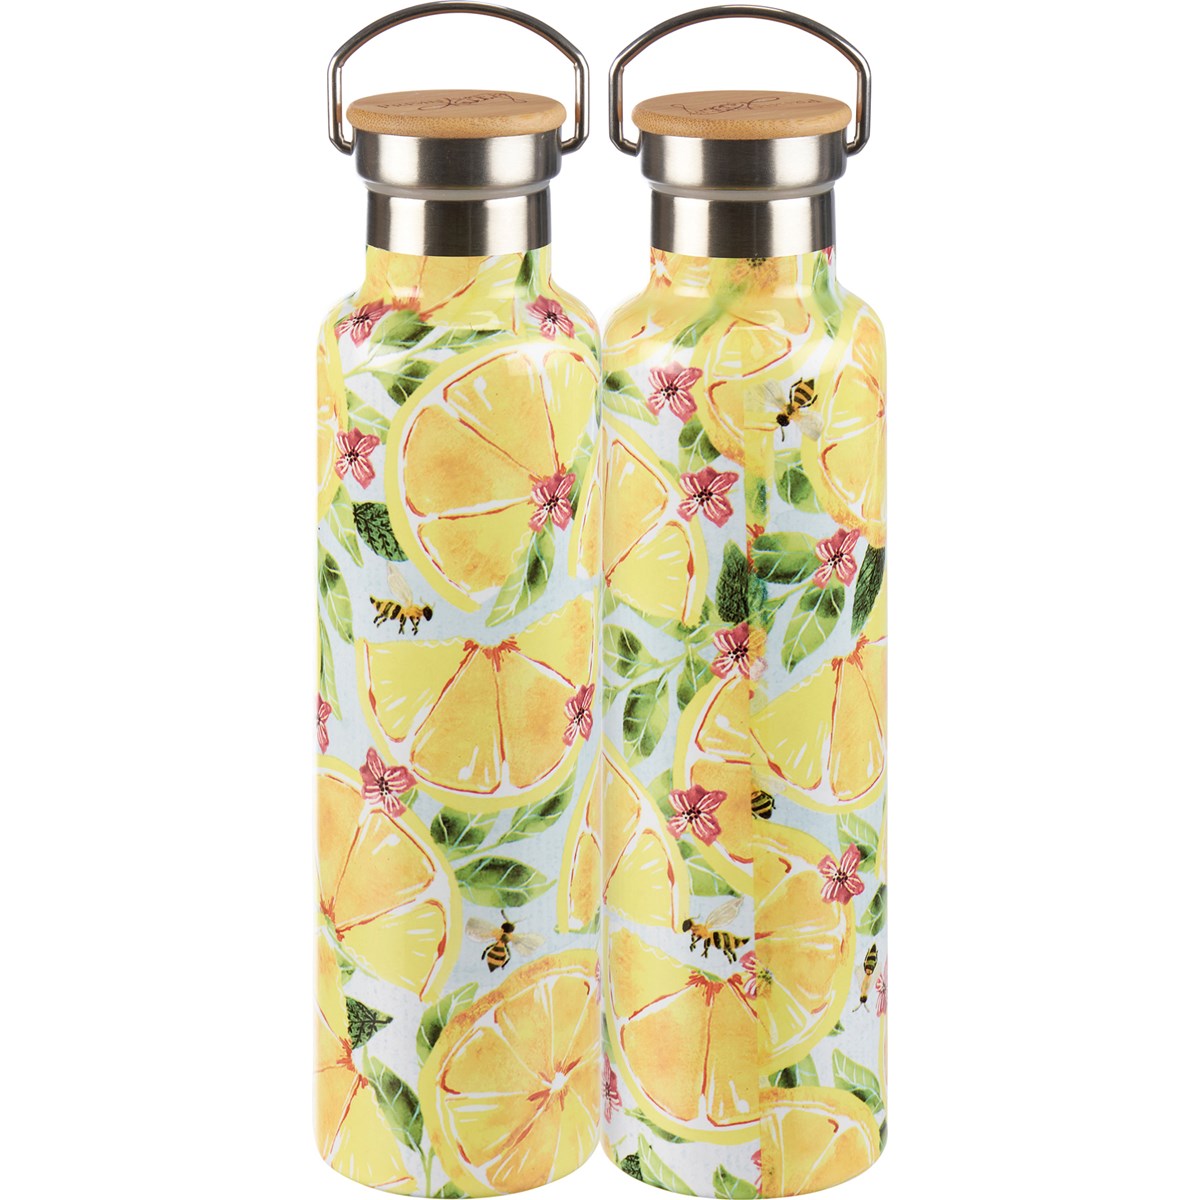 Pucker Up Insulated Bottle - Stainless Steel, Bamboo